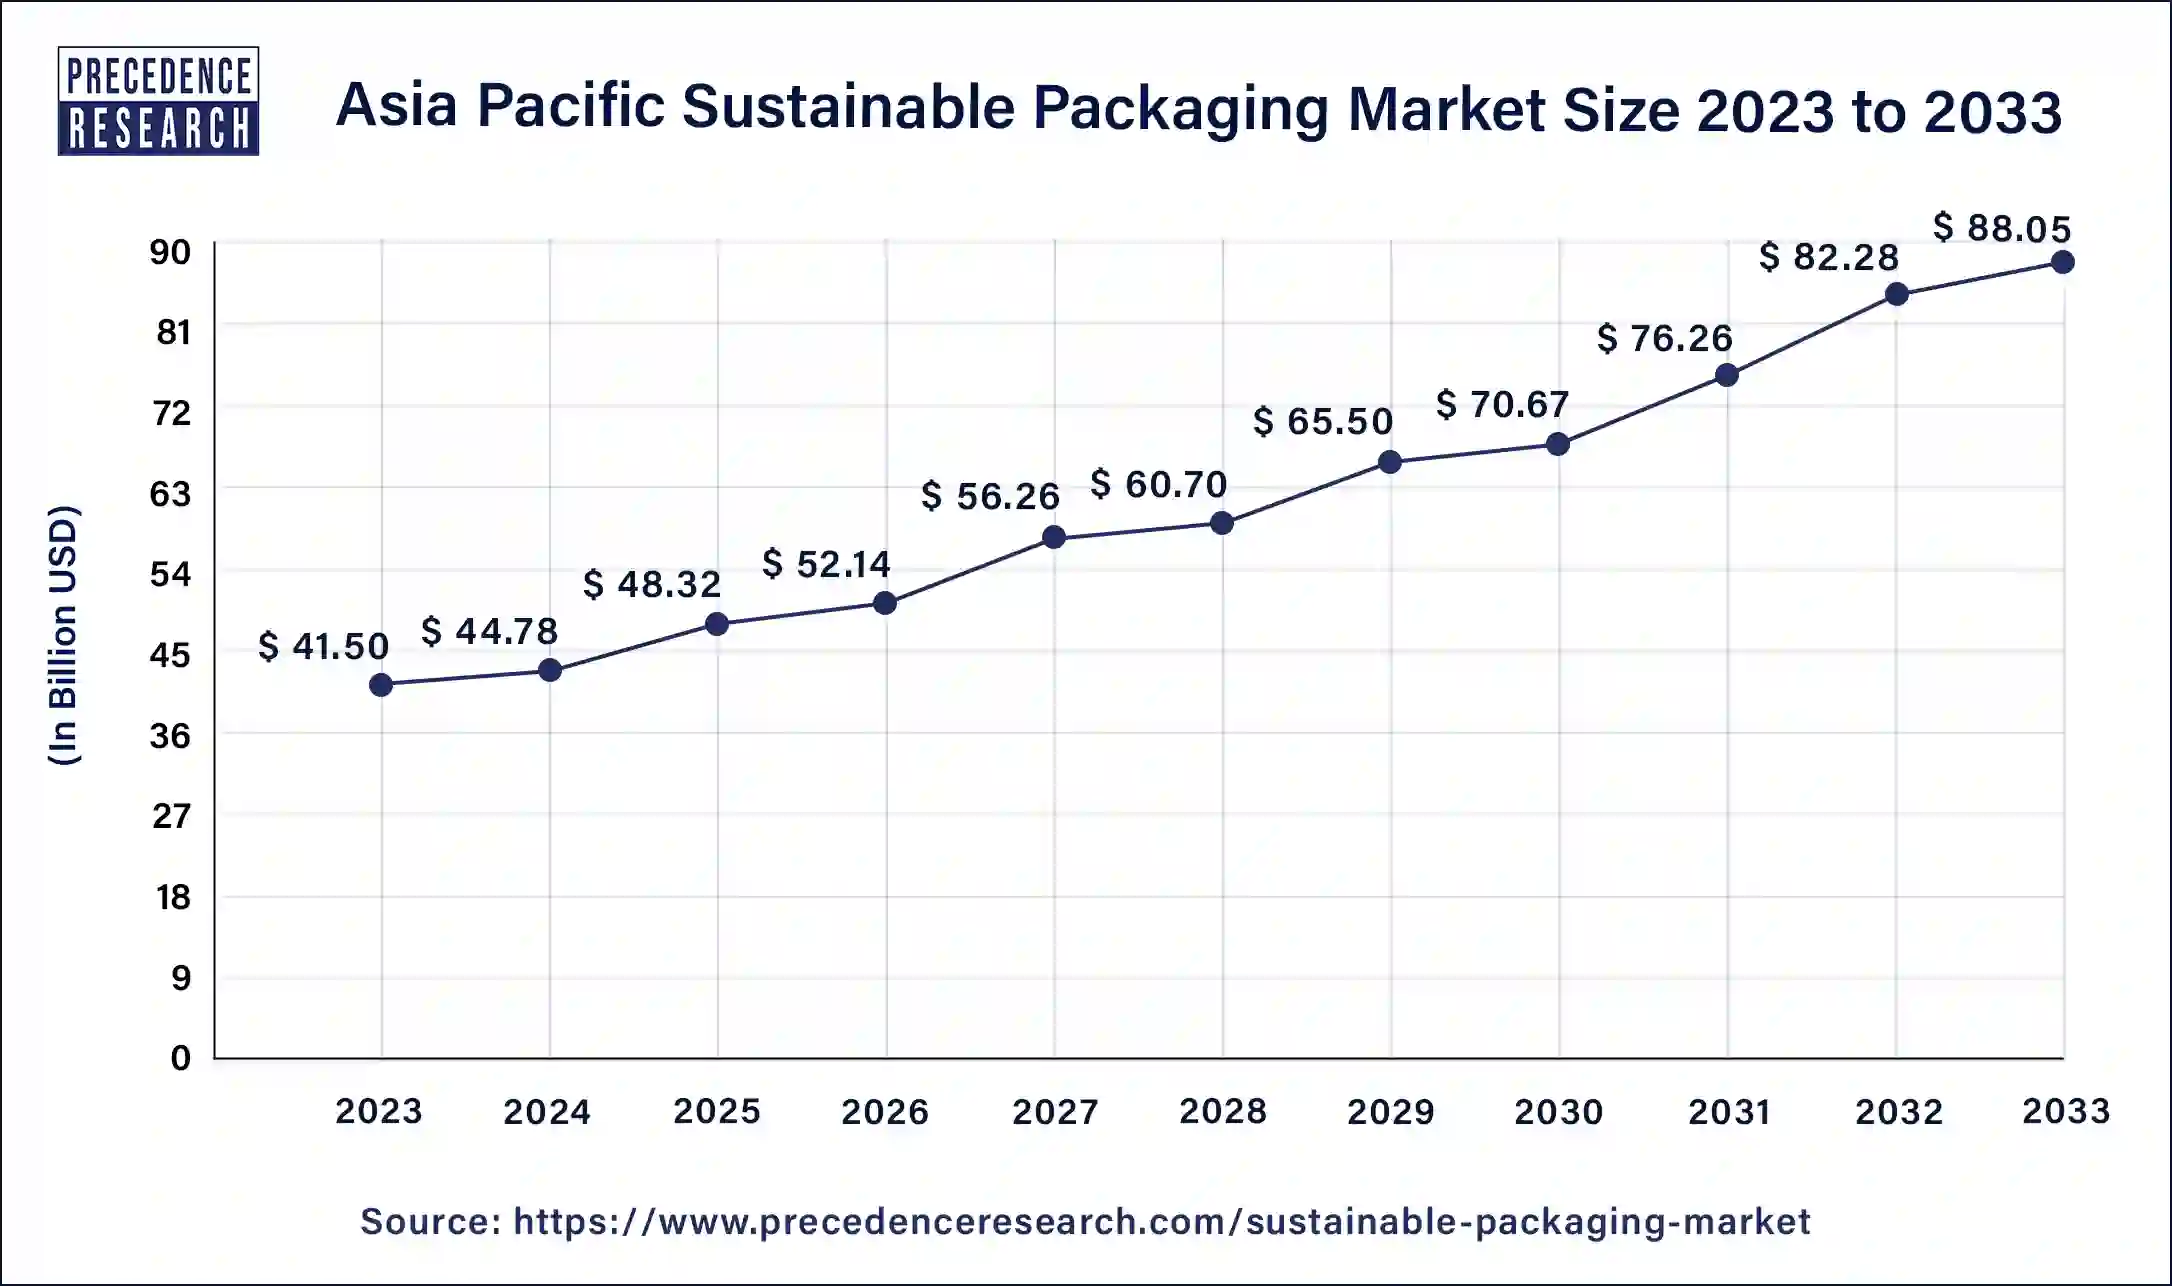 Asia Pacific Sustainable Packaging Market Size 2024 to 2033